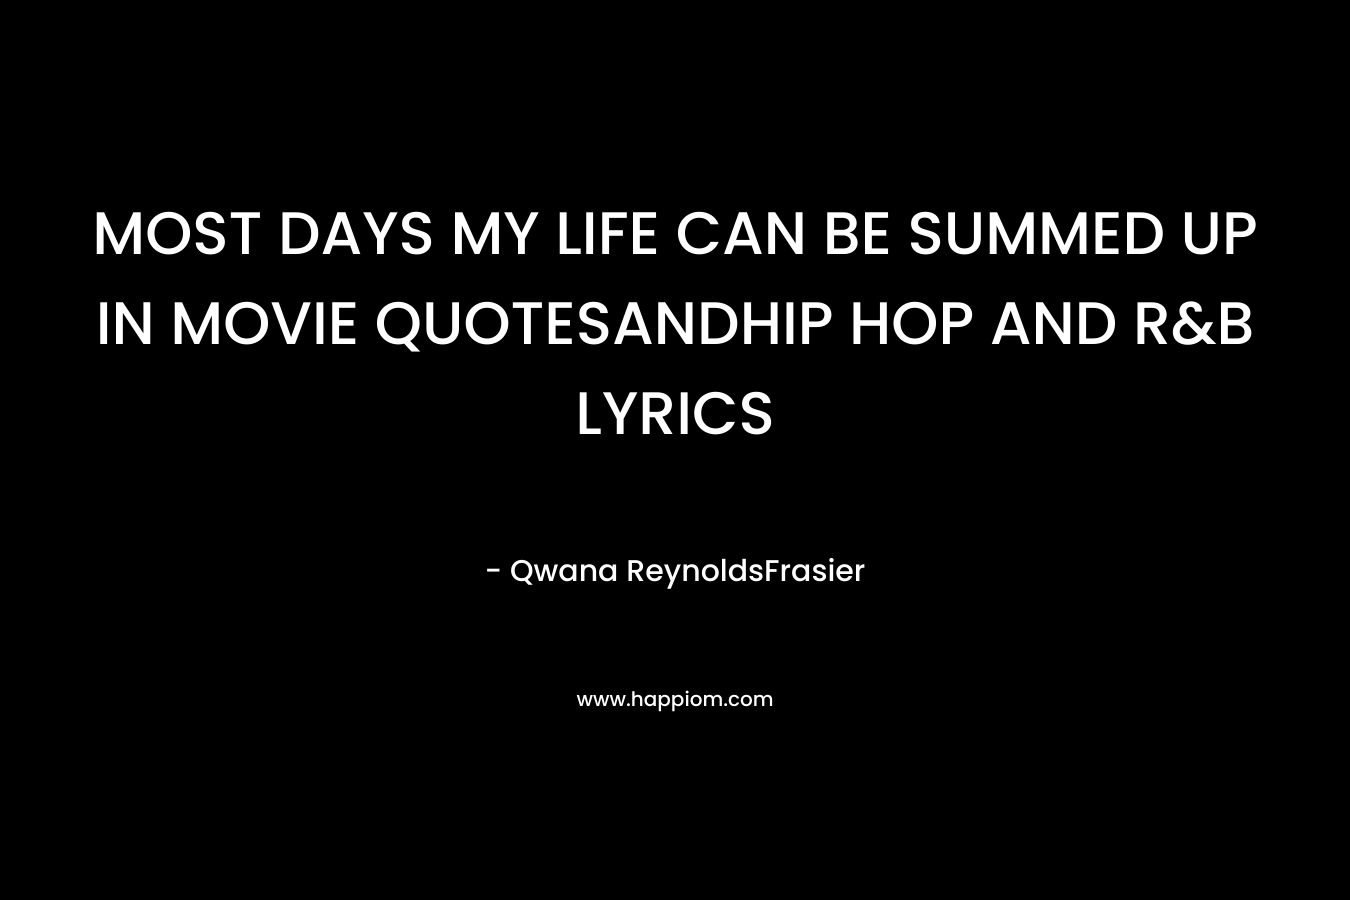 MOST DAYS MY LIFE CAN BE SUMMED UP IN MOVIE QUOTESANDHIP HOP AND R&B LYRICS